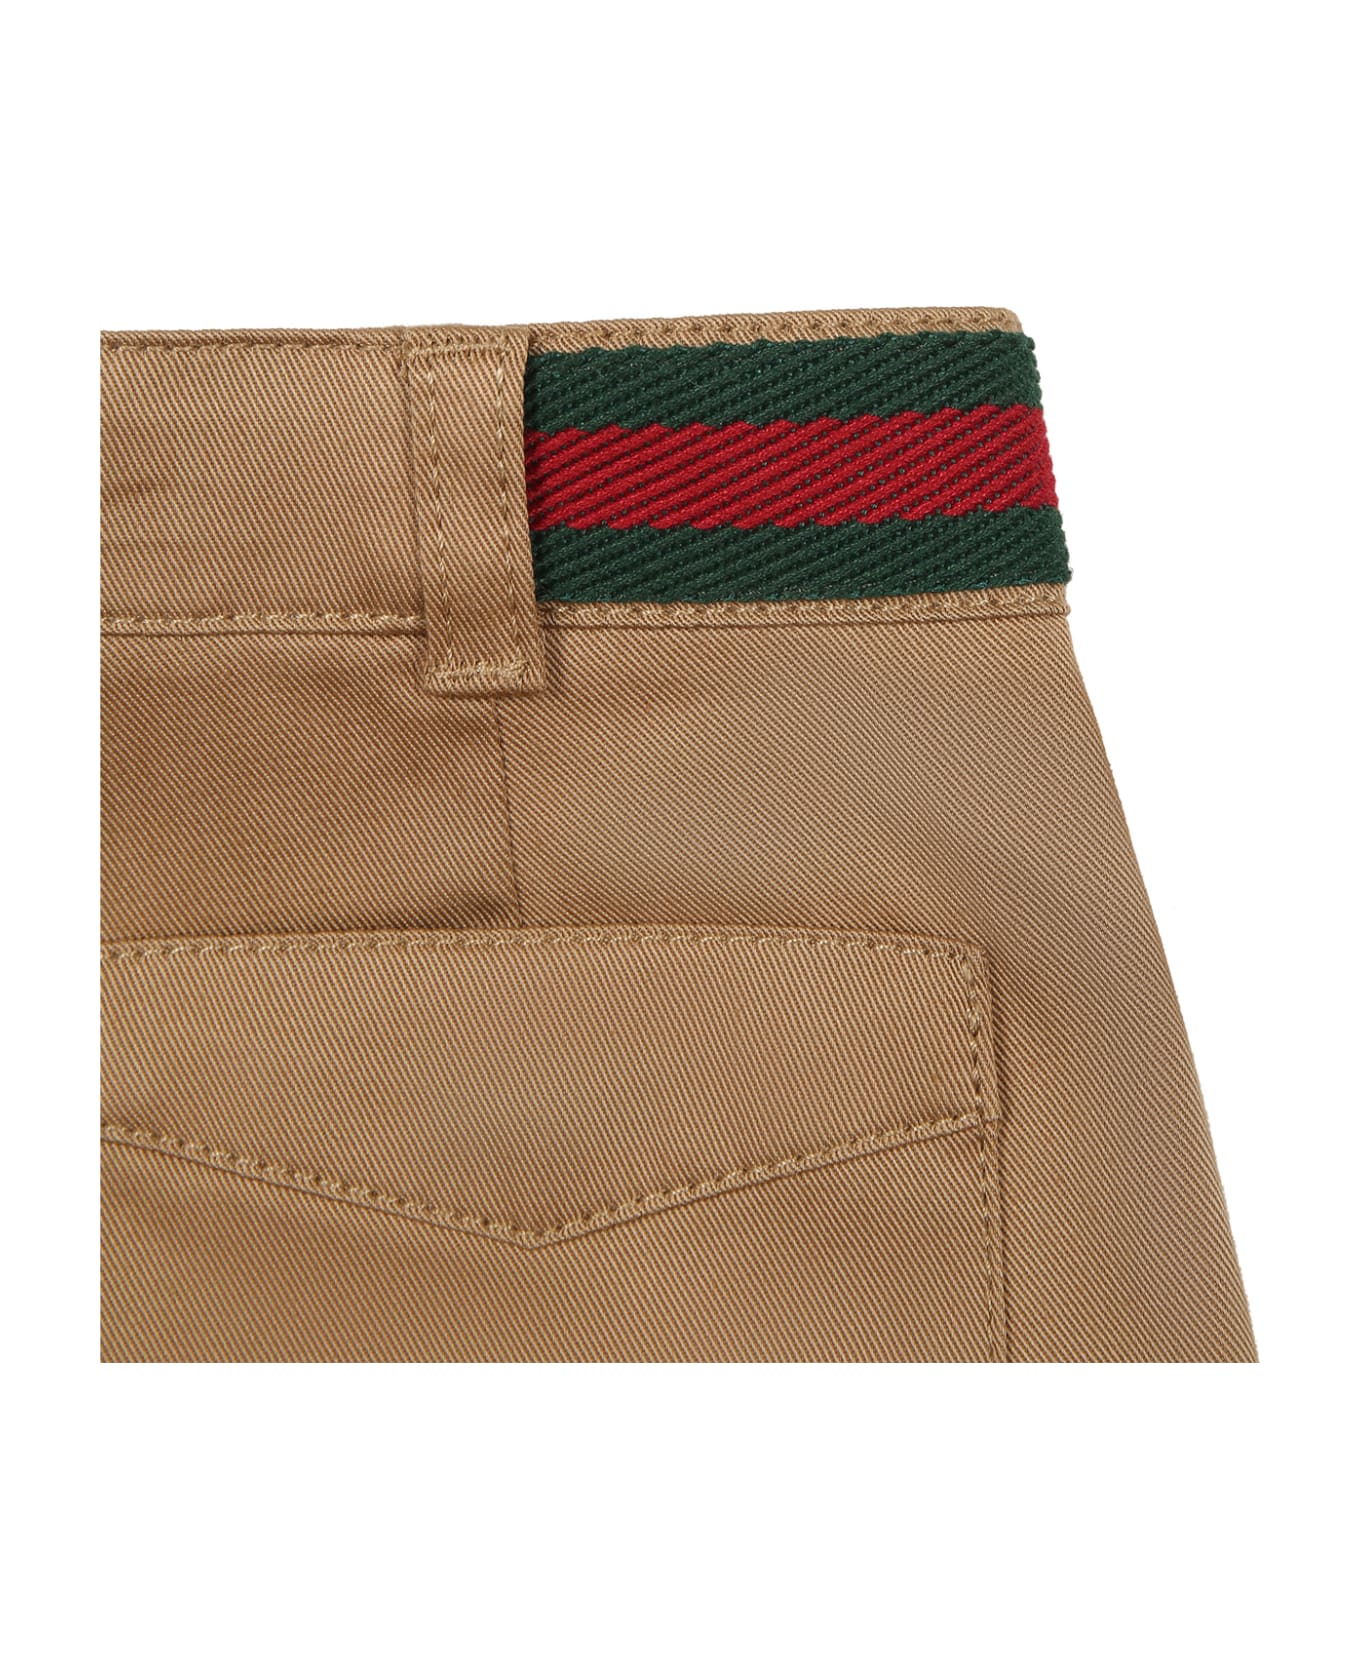 Gucci Beige Shorts For Baby Boy With Web drw - Blu